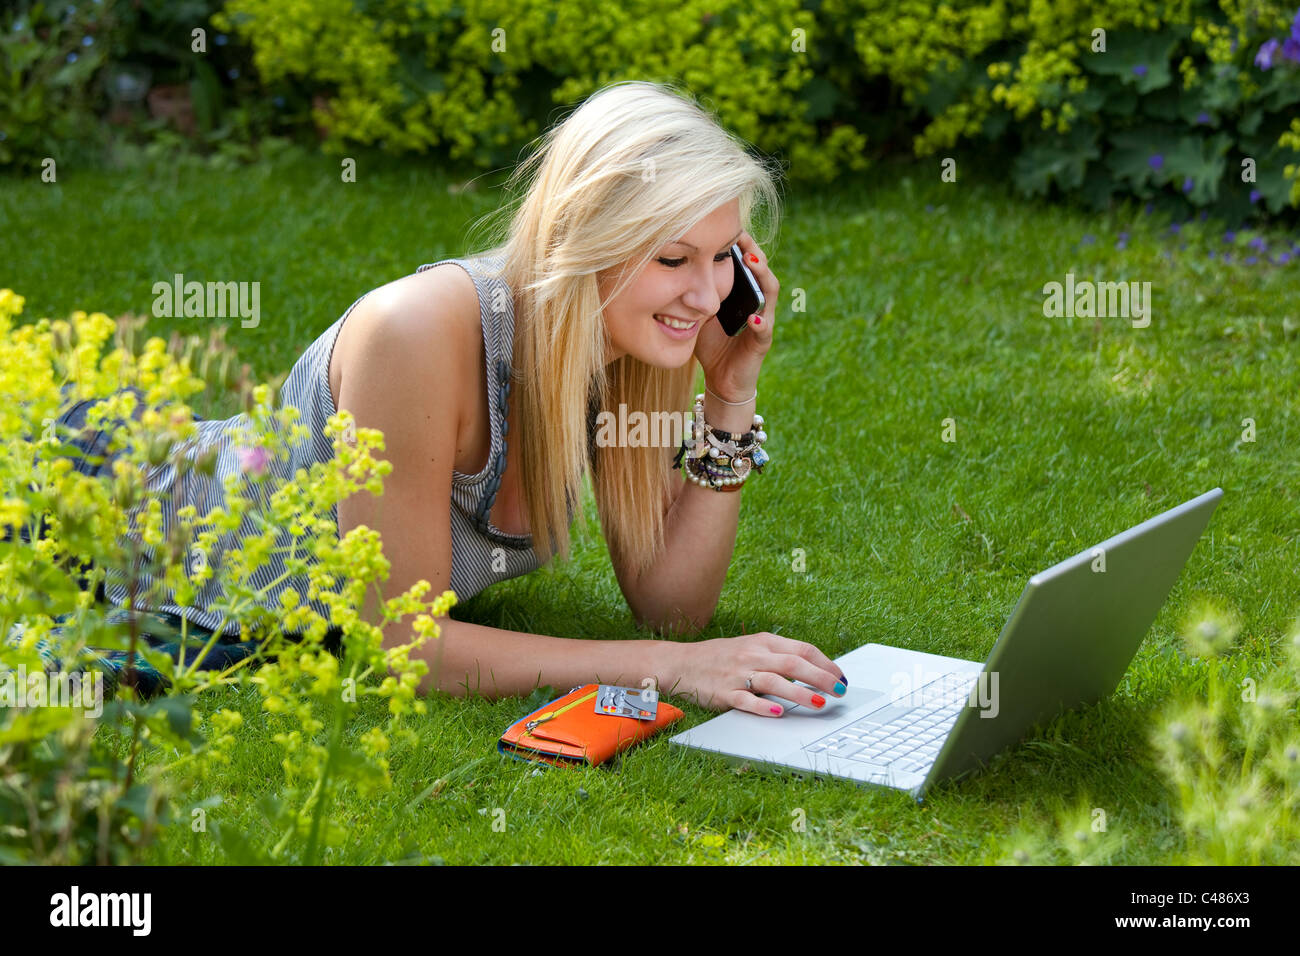 Young girl on moblie phone while on the internet, chatting and socializing on wireless laptop computer in the garden Stock Photo